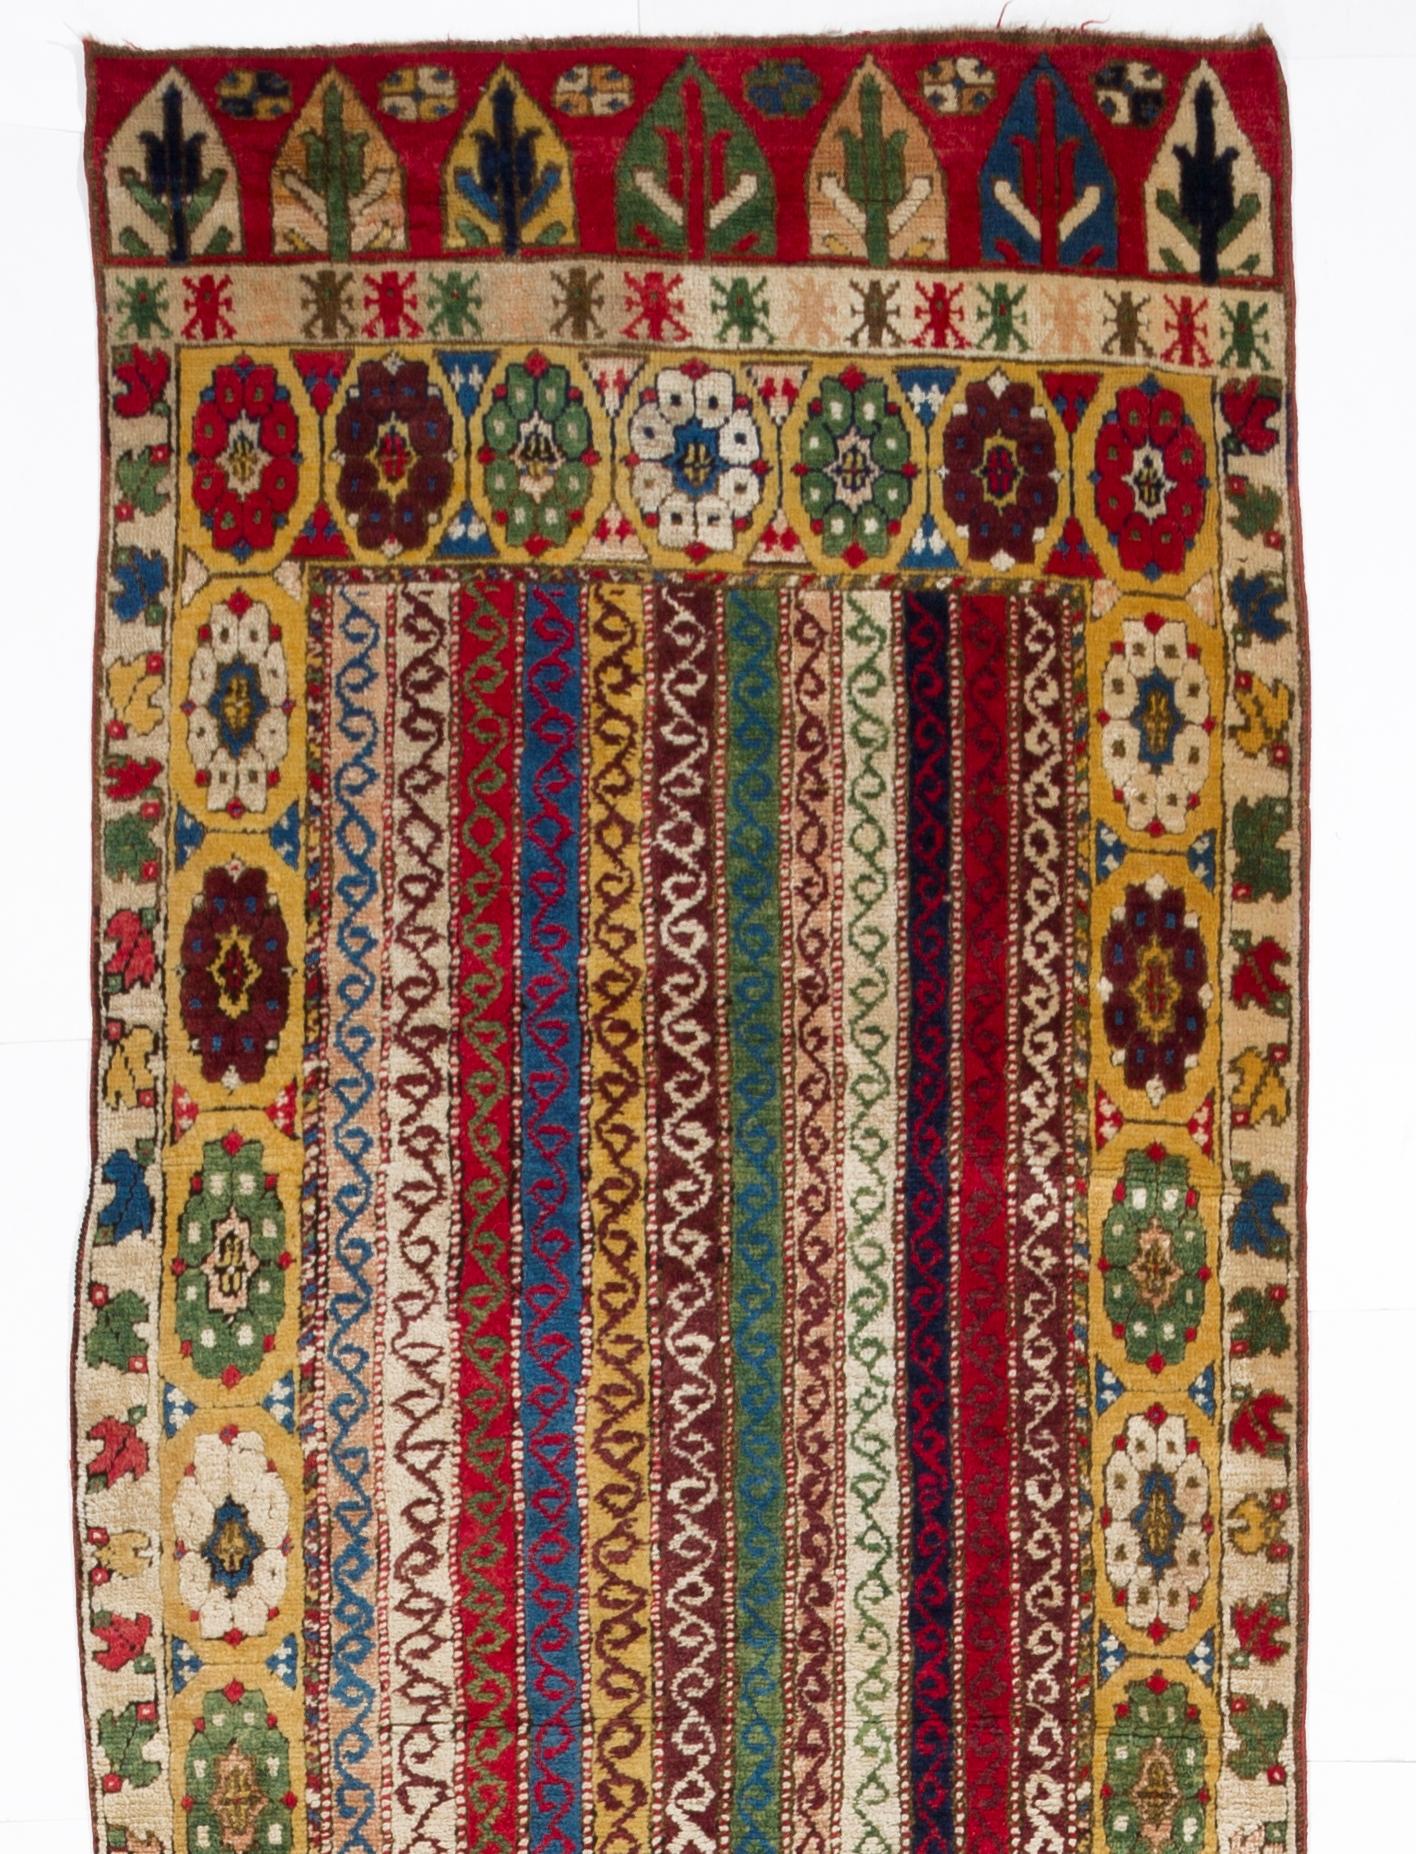 A vintage hand knotted runner rug from Central Anatolia with wool pile on wool foundation. Very good condition, sturdy and as clean as a brand new rug.

This rug is made of 100% natural dyed hand-spun wool, no chemical dyes. 
Size: 3.3 x 14.5 Ft